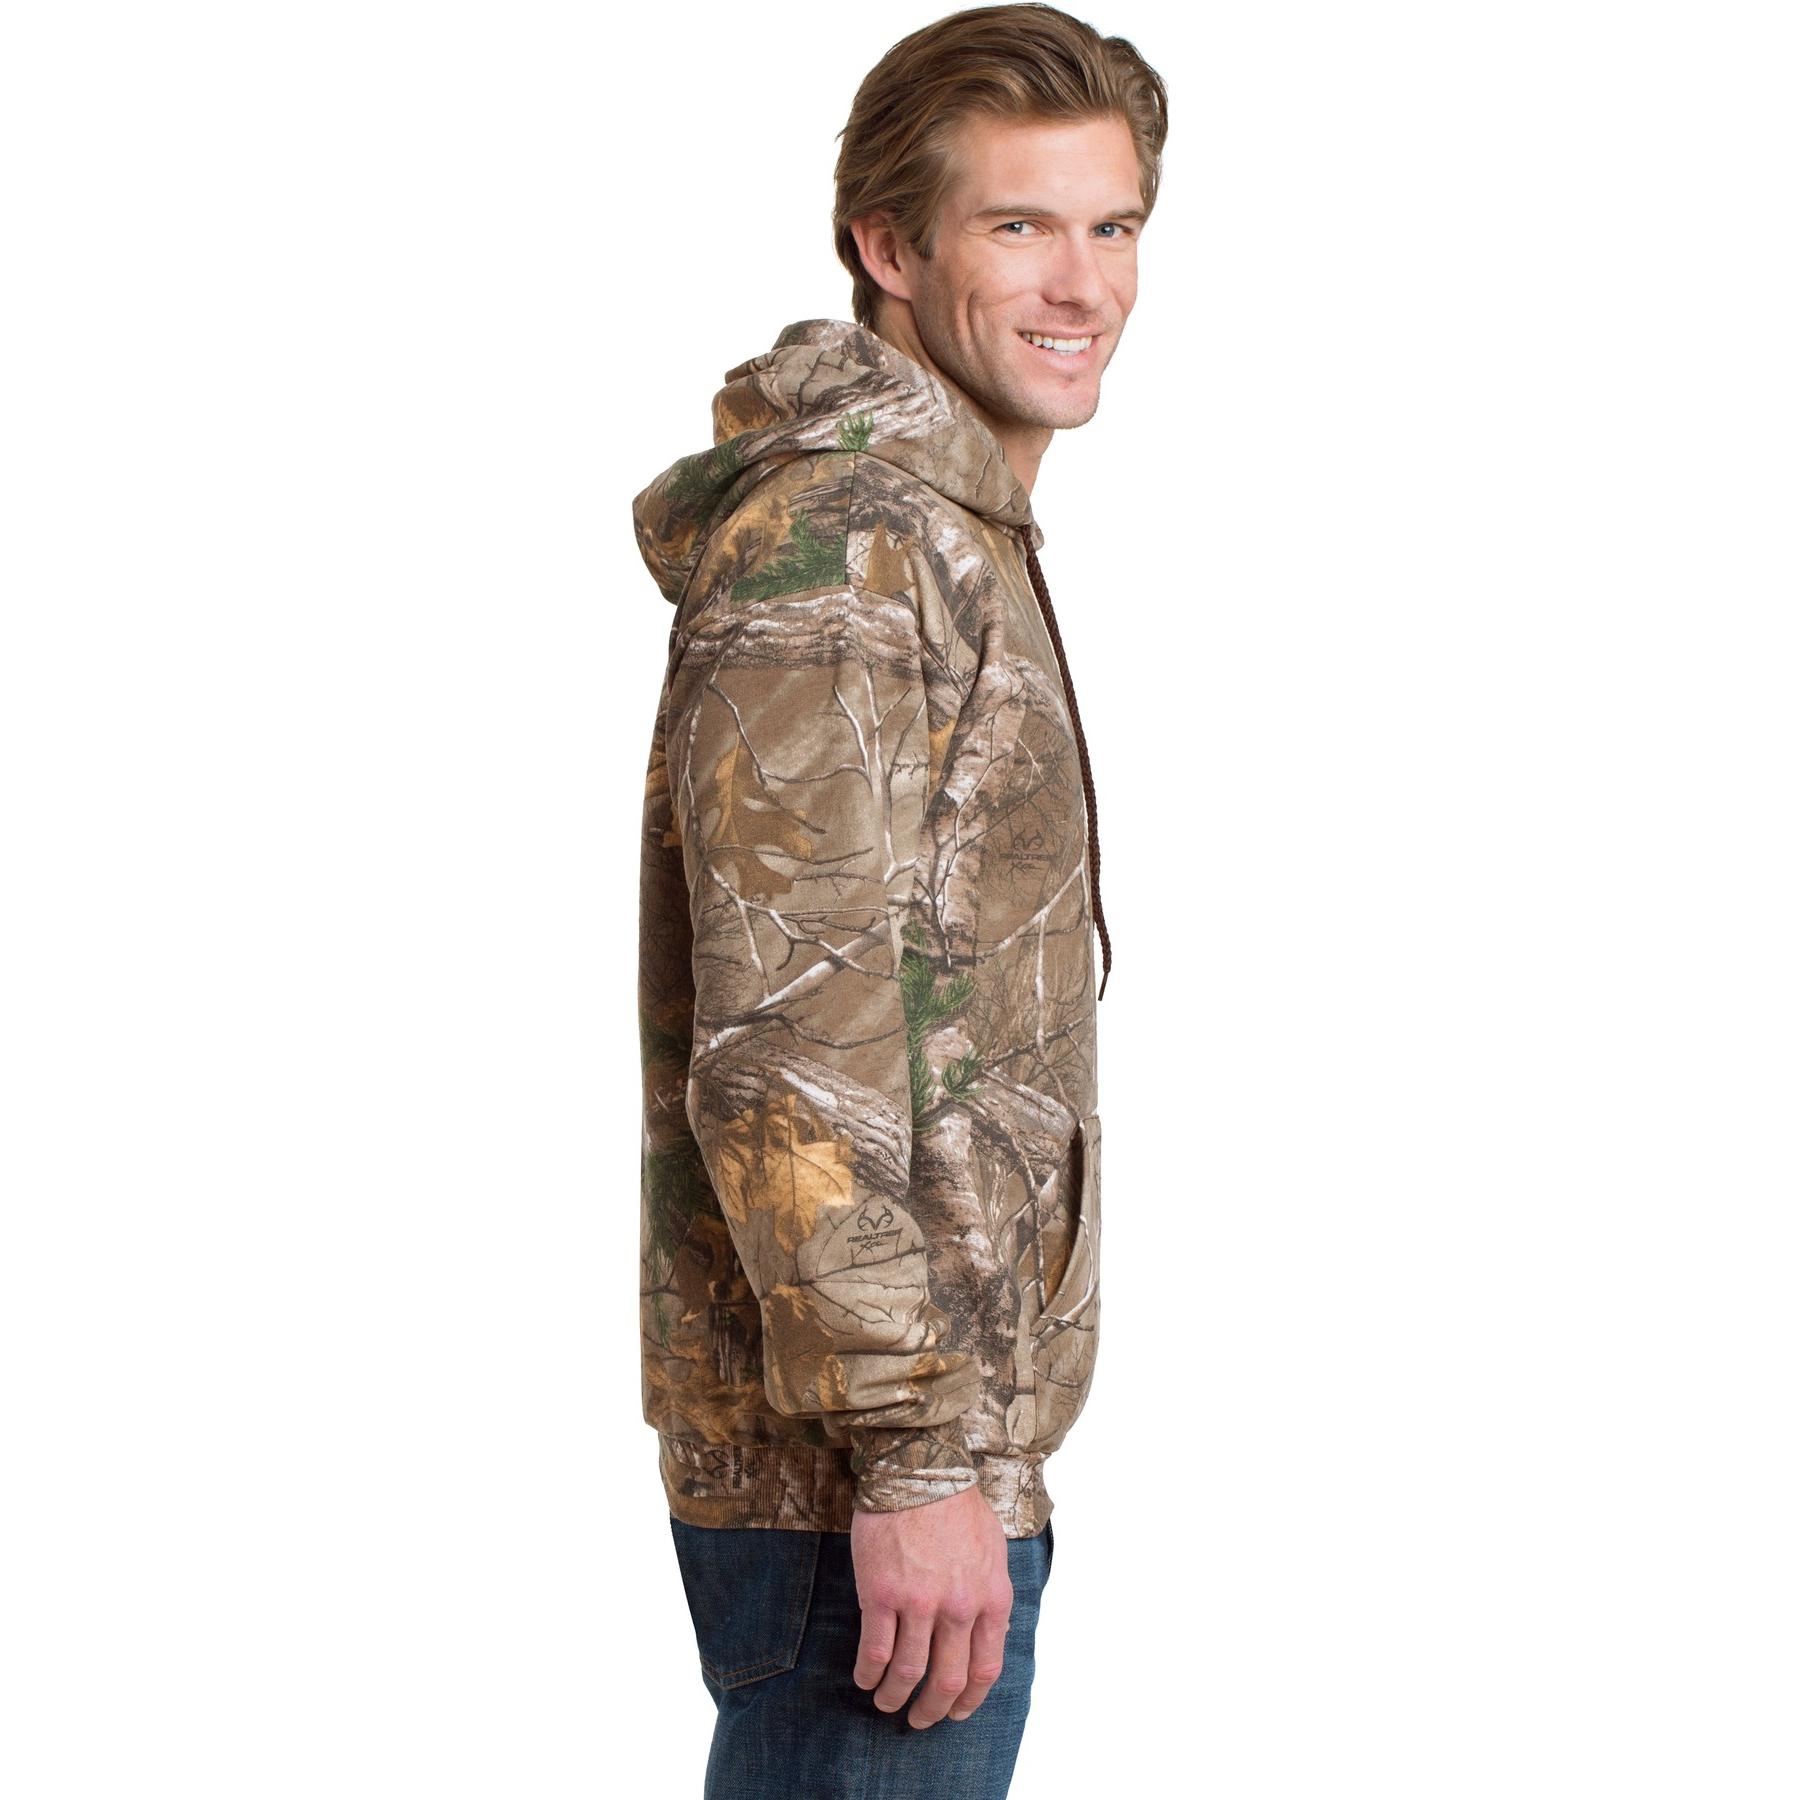 Russell Outdoors - Realtree Explorer 100% Cotton T-Shirt - NP0021R - Realtree Xtra, 2XL